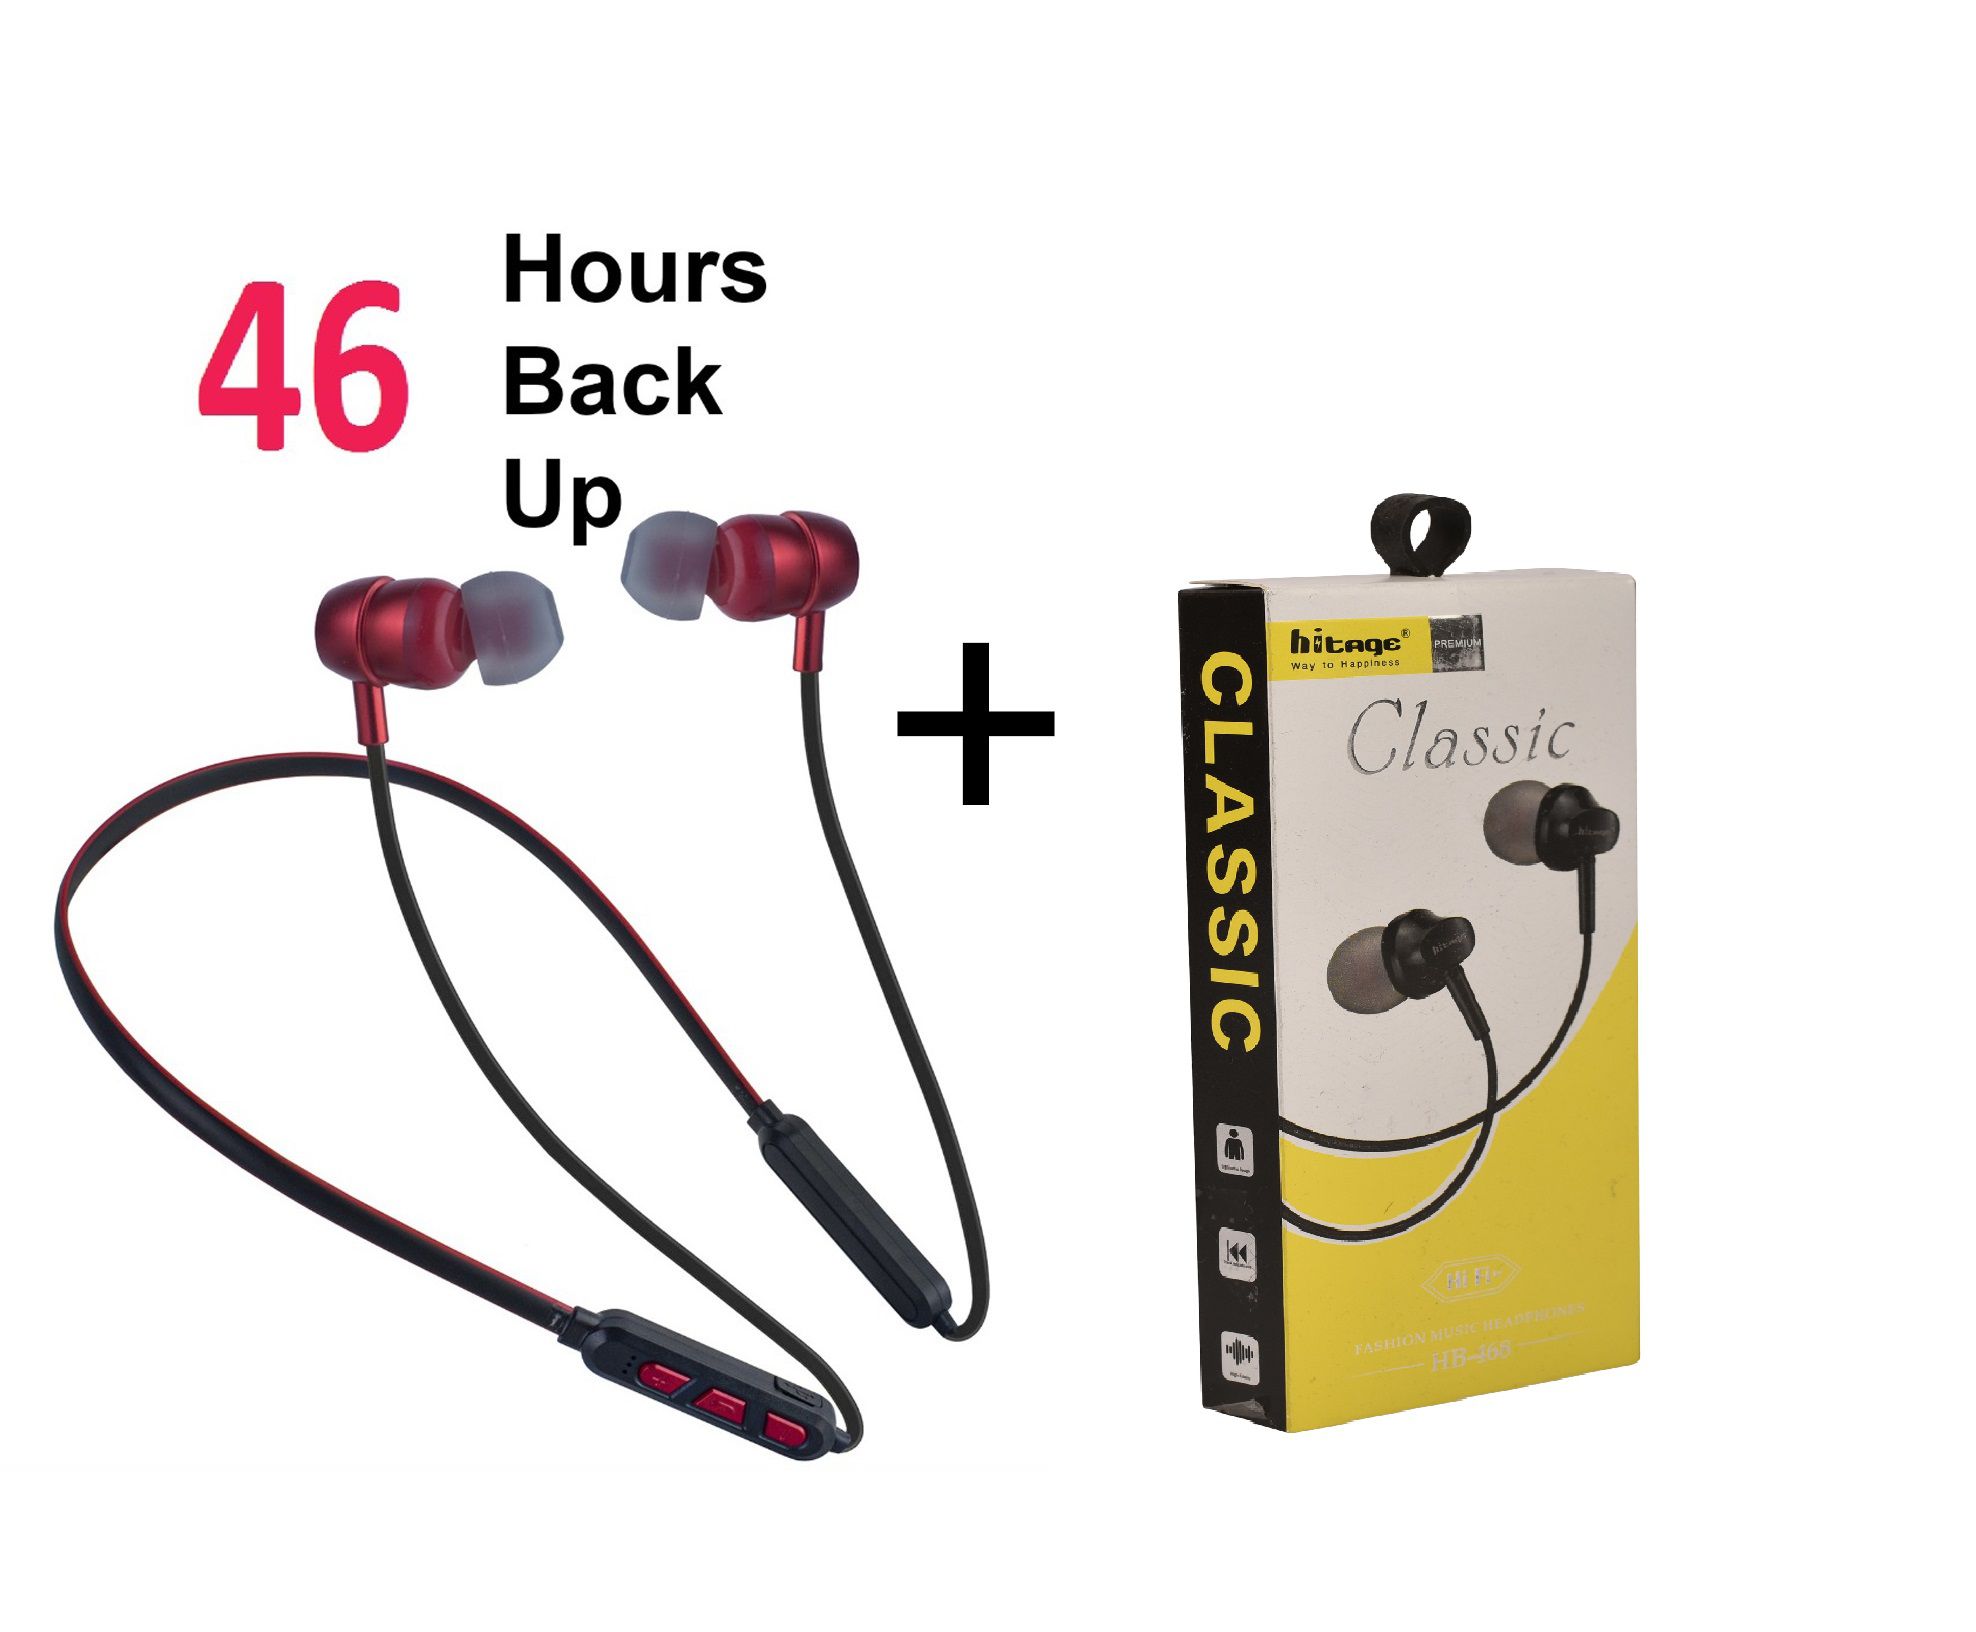 Hitage NBT-6858 AND EARPHONE COMBO MAGNETIC 46 HOURS BATTERY BACKUP [ FEEL THE KICK ] Compatible ALL ANDROID AND IOS SYSTEM Wireless magnetic Neckband 46 Hours Music Playback With Bass